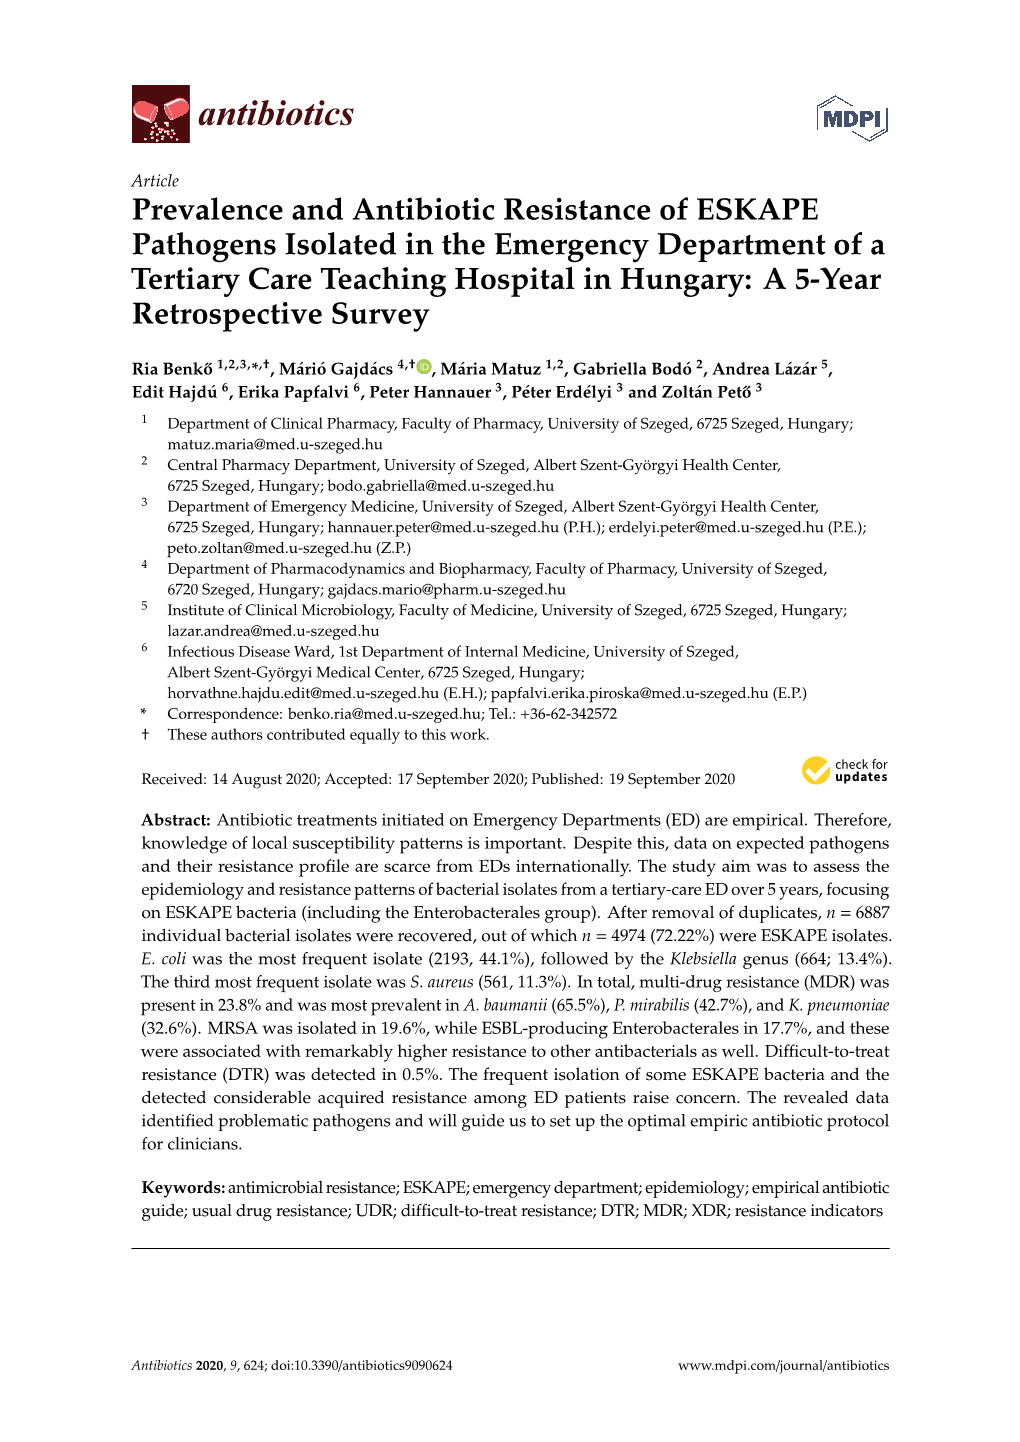 Prevalence and Antibiotic Resistance of ESKAPE Pathogens Isolated In